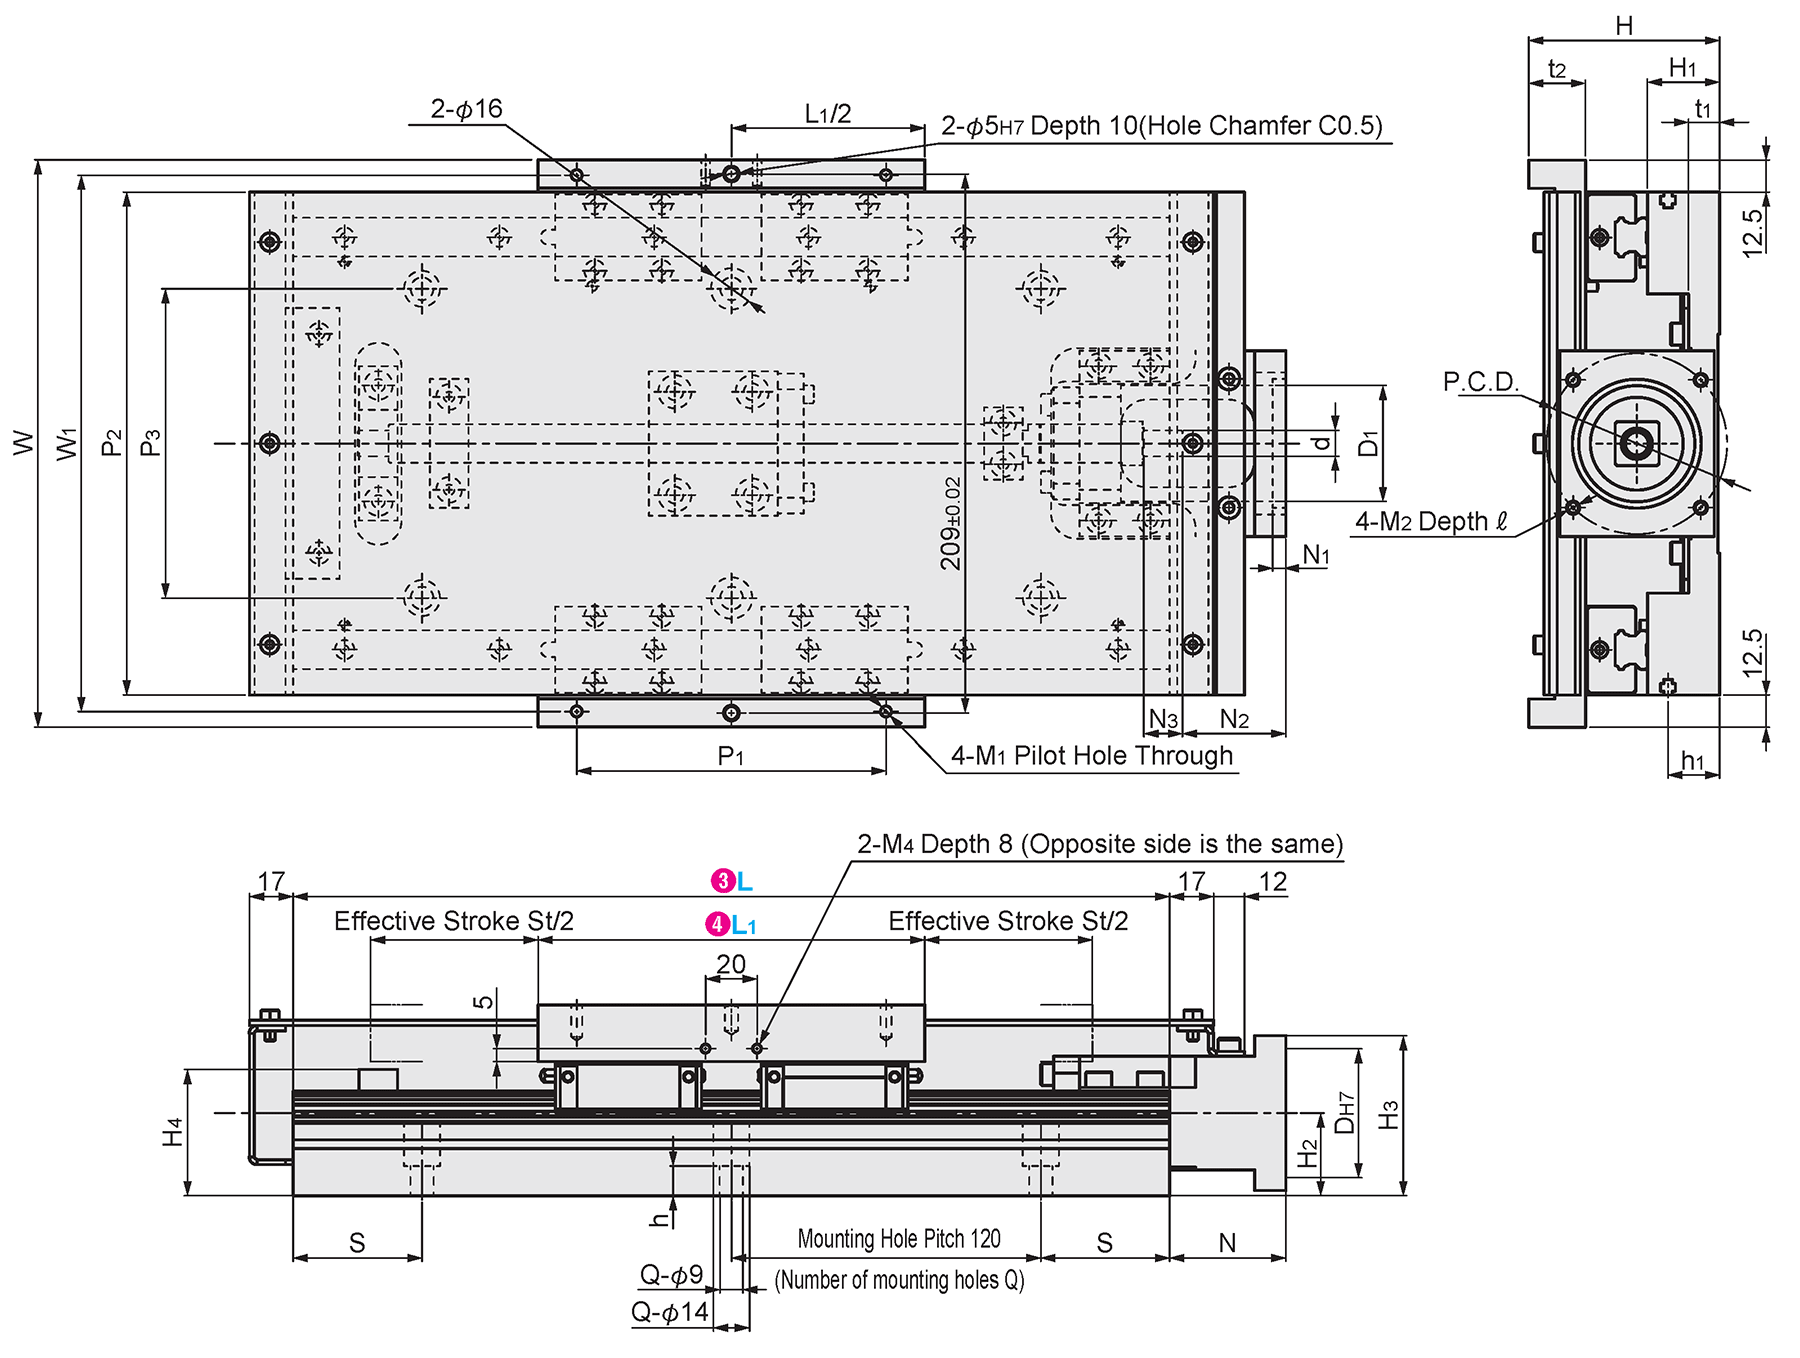 Dimensional drawing of KUAC/KUHC motor installation dowel hole and effective stroke